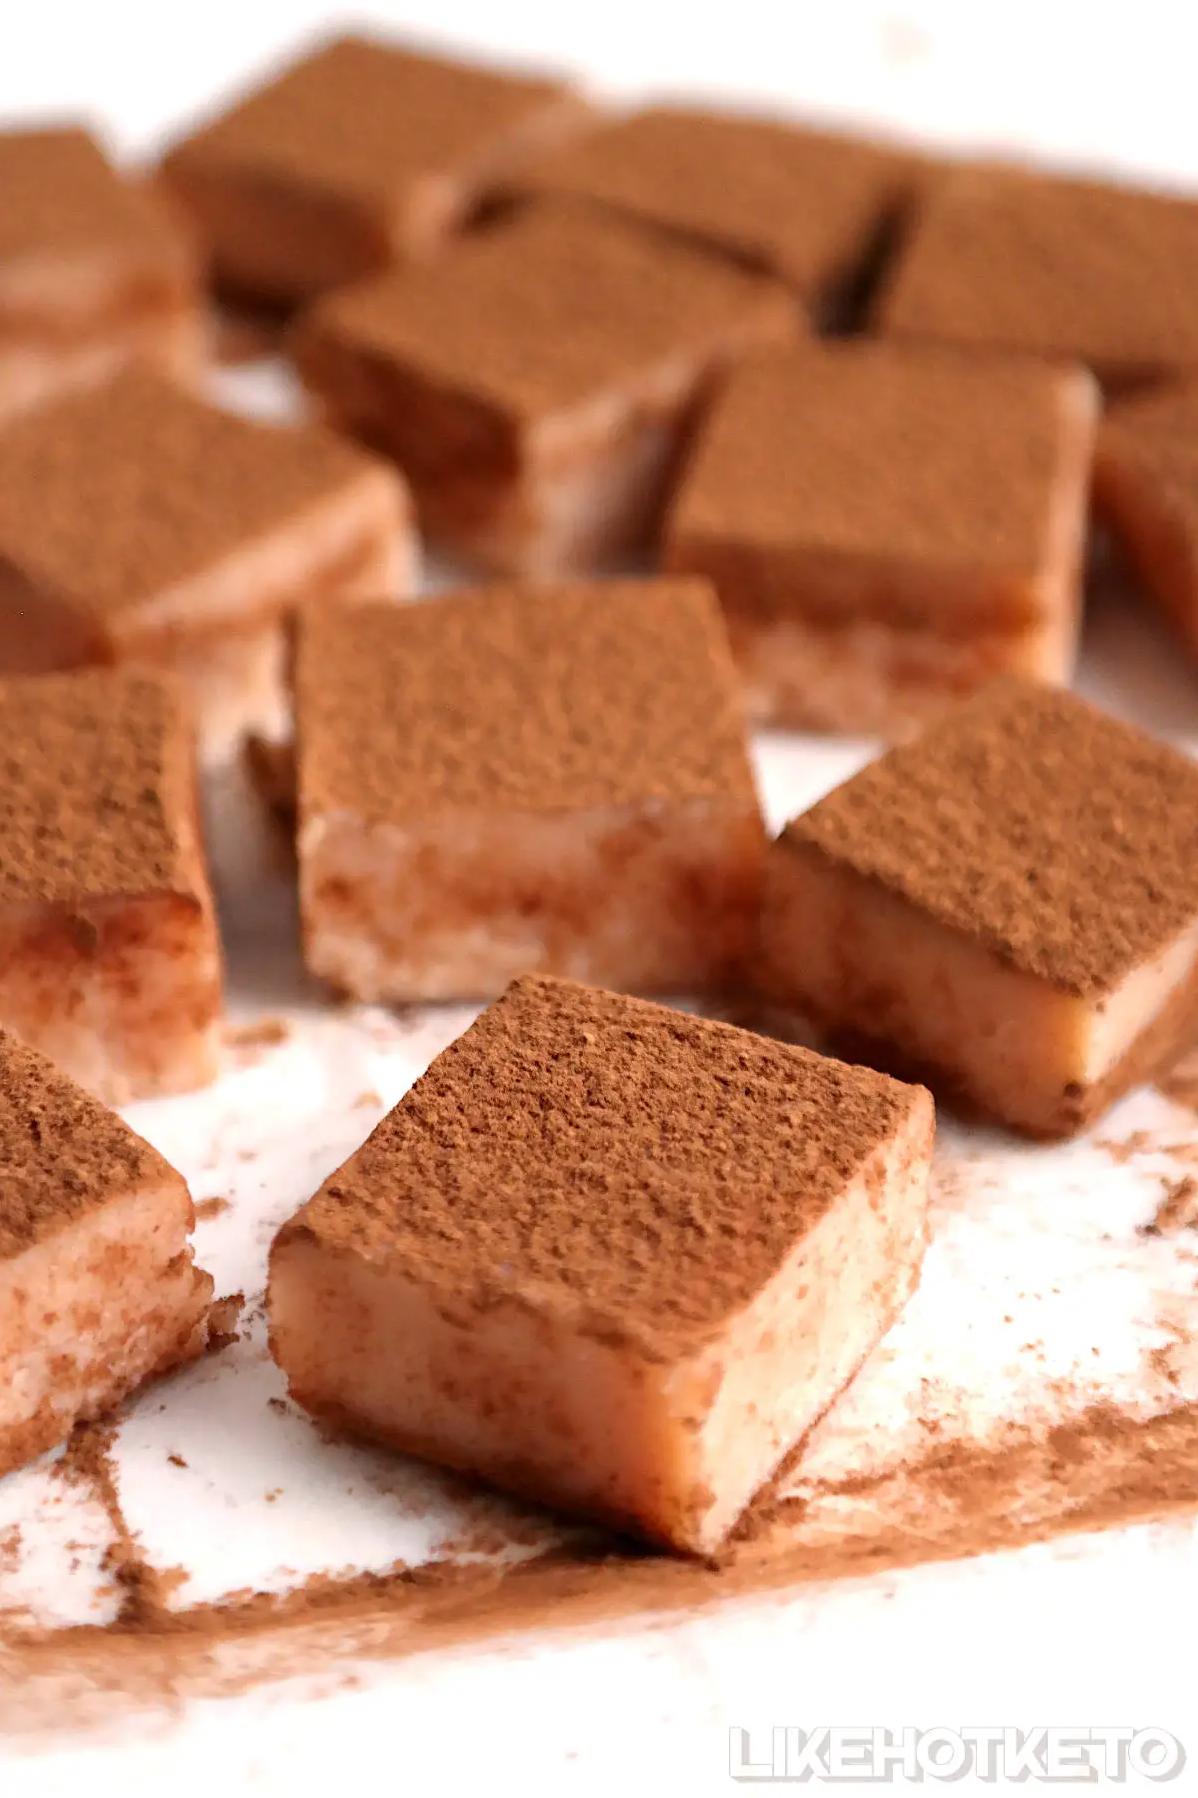  The smooth, silky texture of these squares is a heavenly contrast to the crunchy topping.